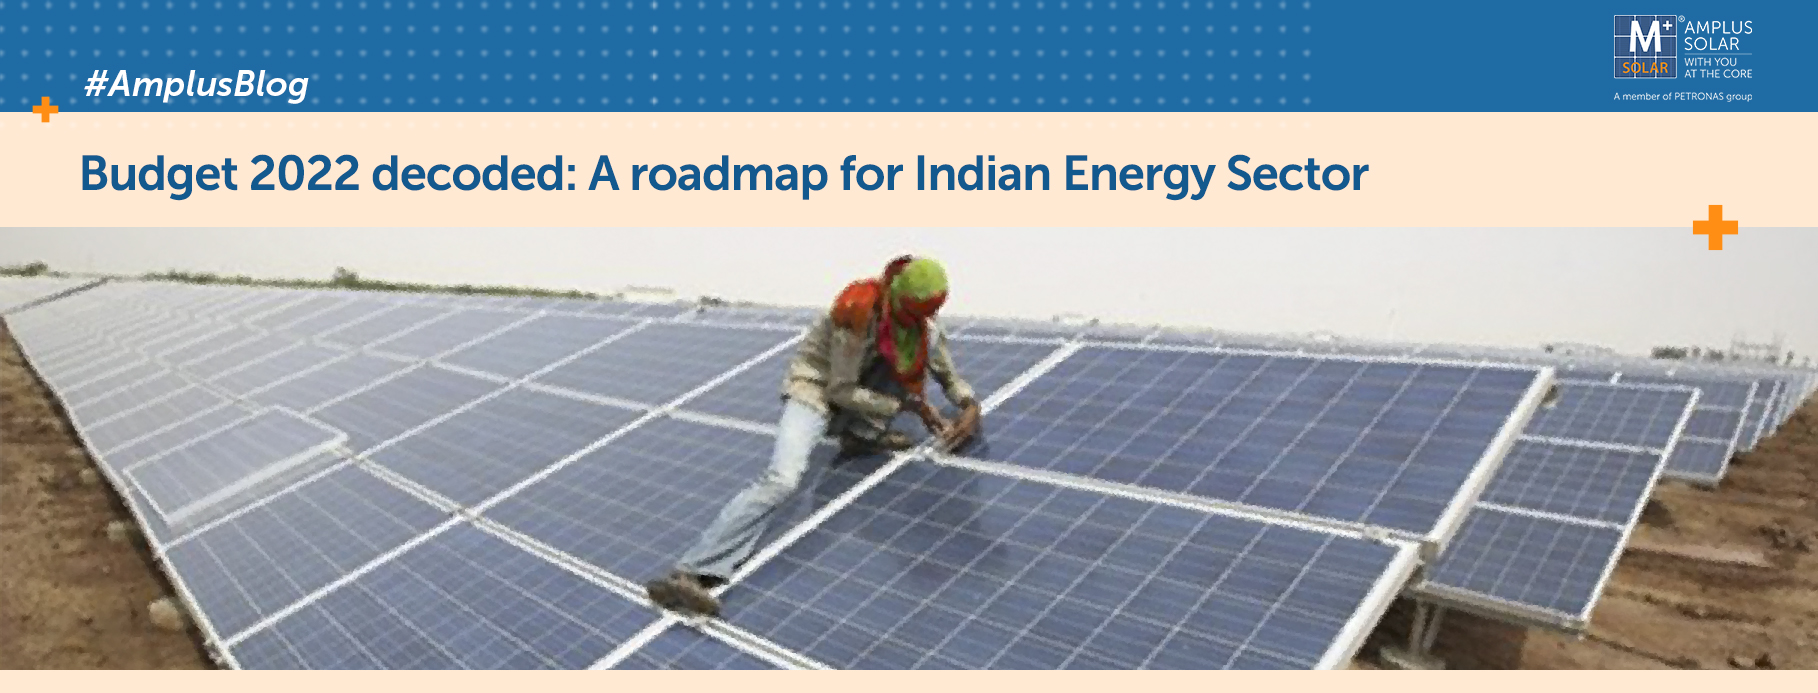 Budget 2022 decoded: A roadmap for Indian Energy Sector